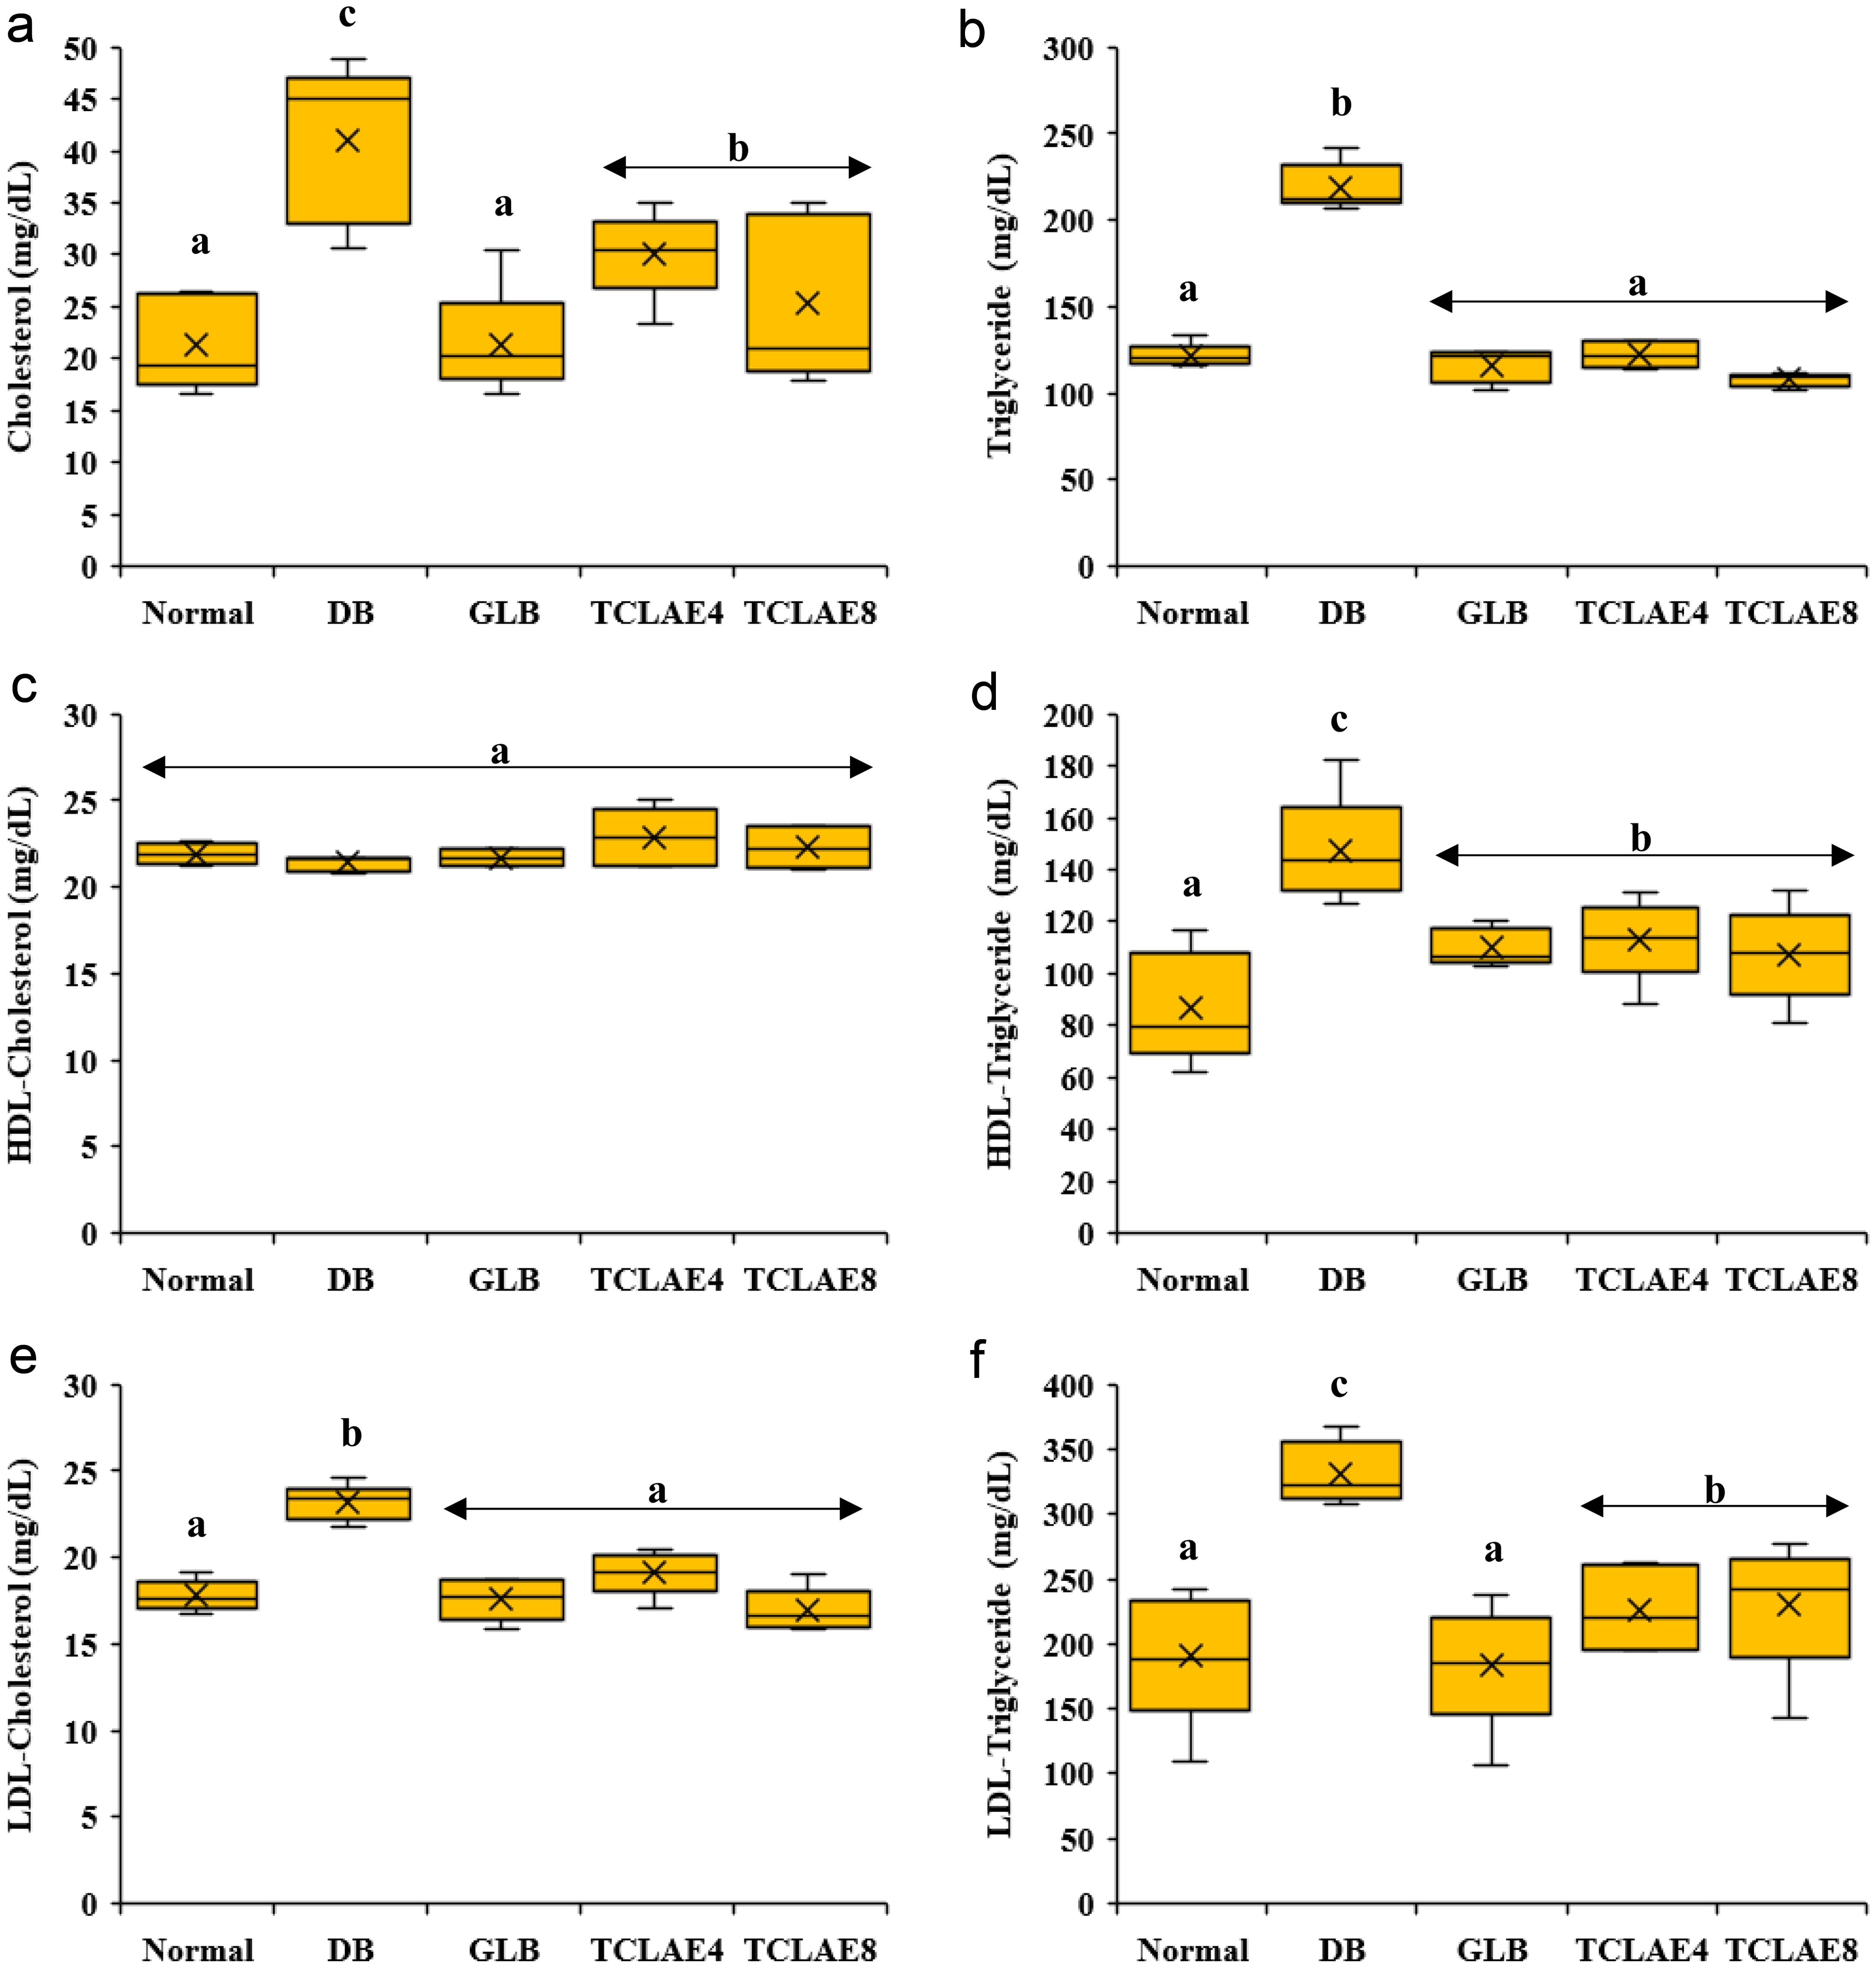 Effect of TCLAE treatment on the hepatic (a) cholesterol, (b) triglyceride, (c) HDL-cholesterol, (d) HDL-triglyceride, (e) LDL-cholesterol, and (f) LDL-triglyceride concentrations of T2DM rats.